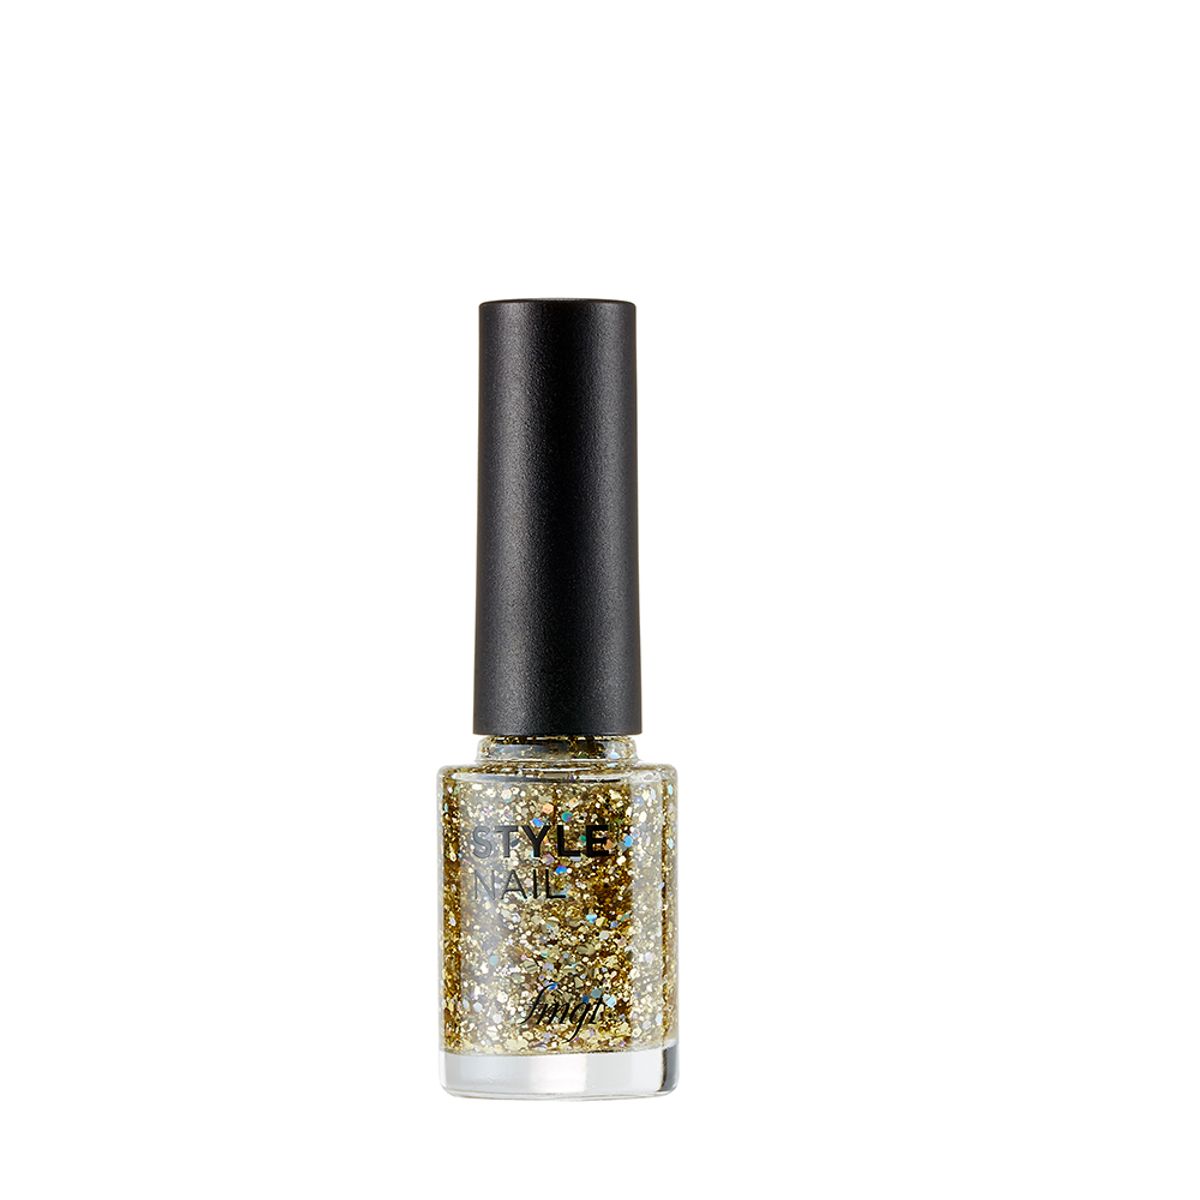 fmgt-son-mong-tay-thefaceshop-style-nail-7ml-7